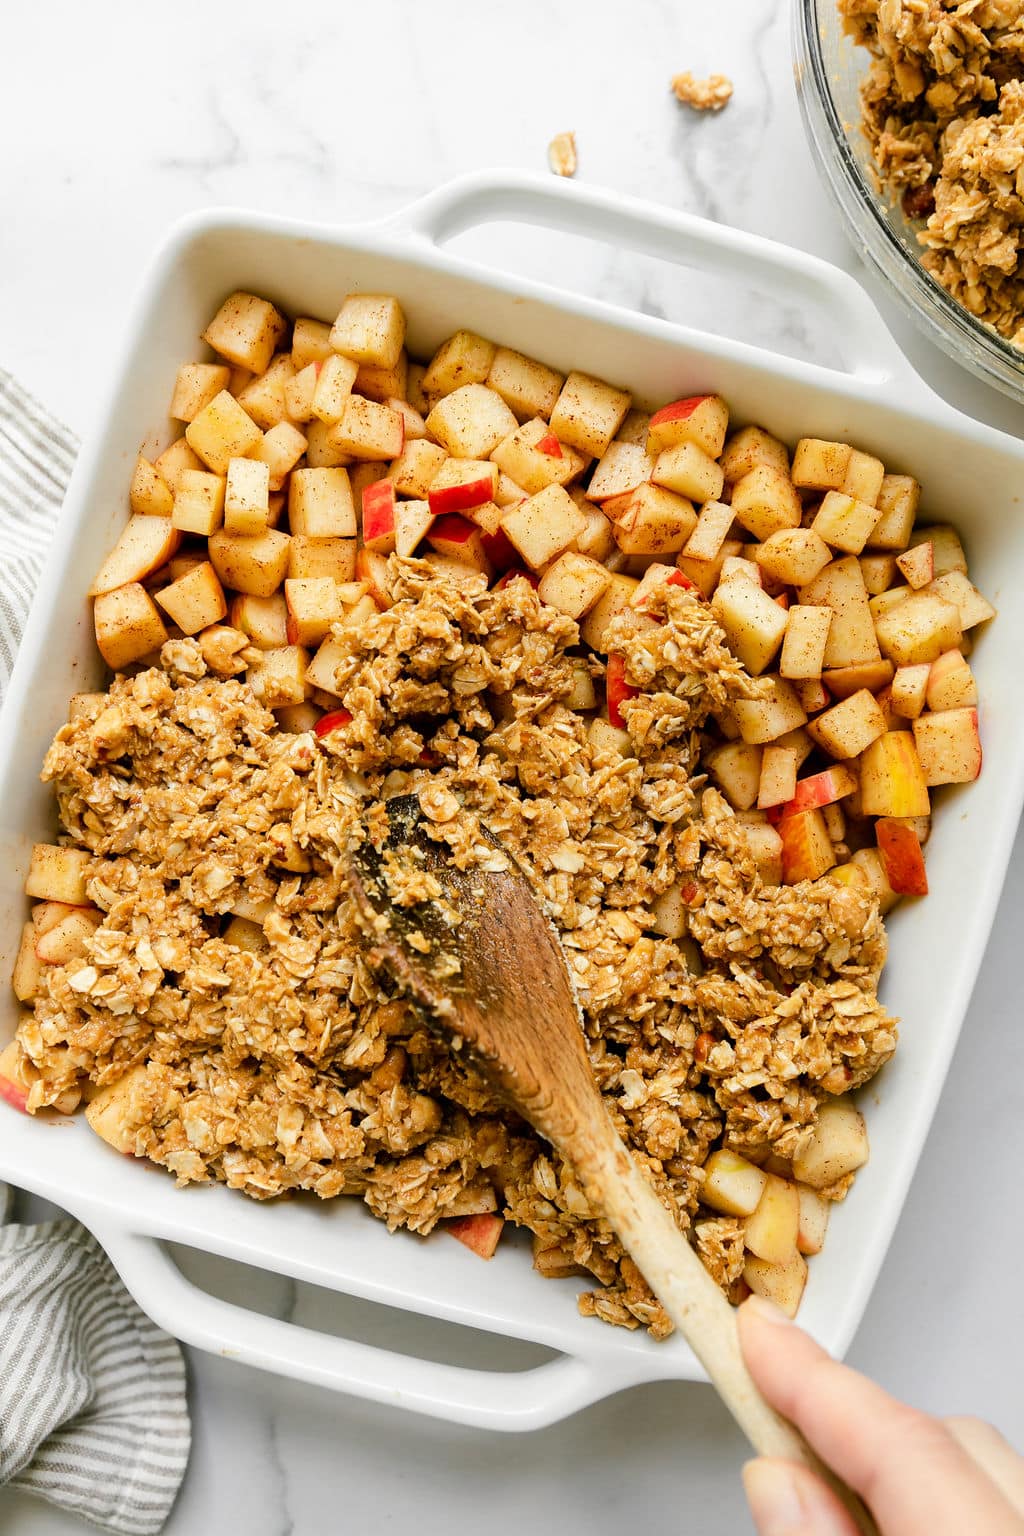 A wooden spoon spreading peanut butter topping over diced apples with cinnamon in white baking dish.